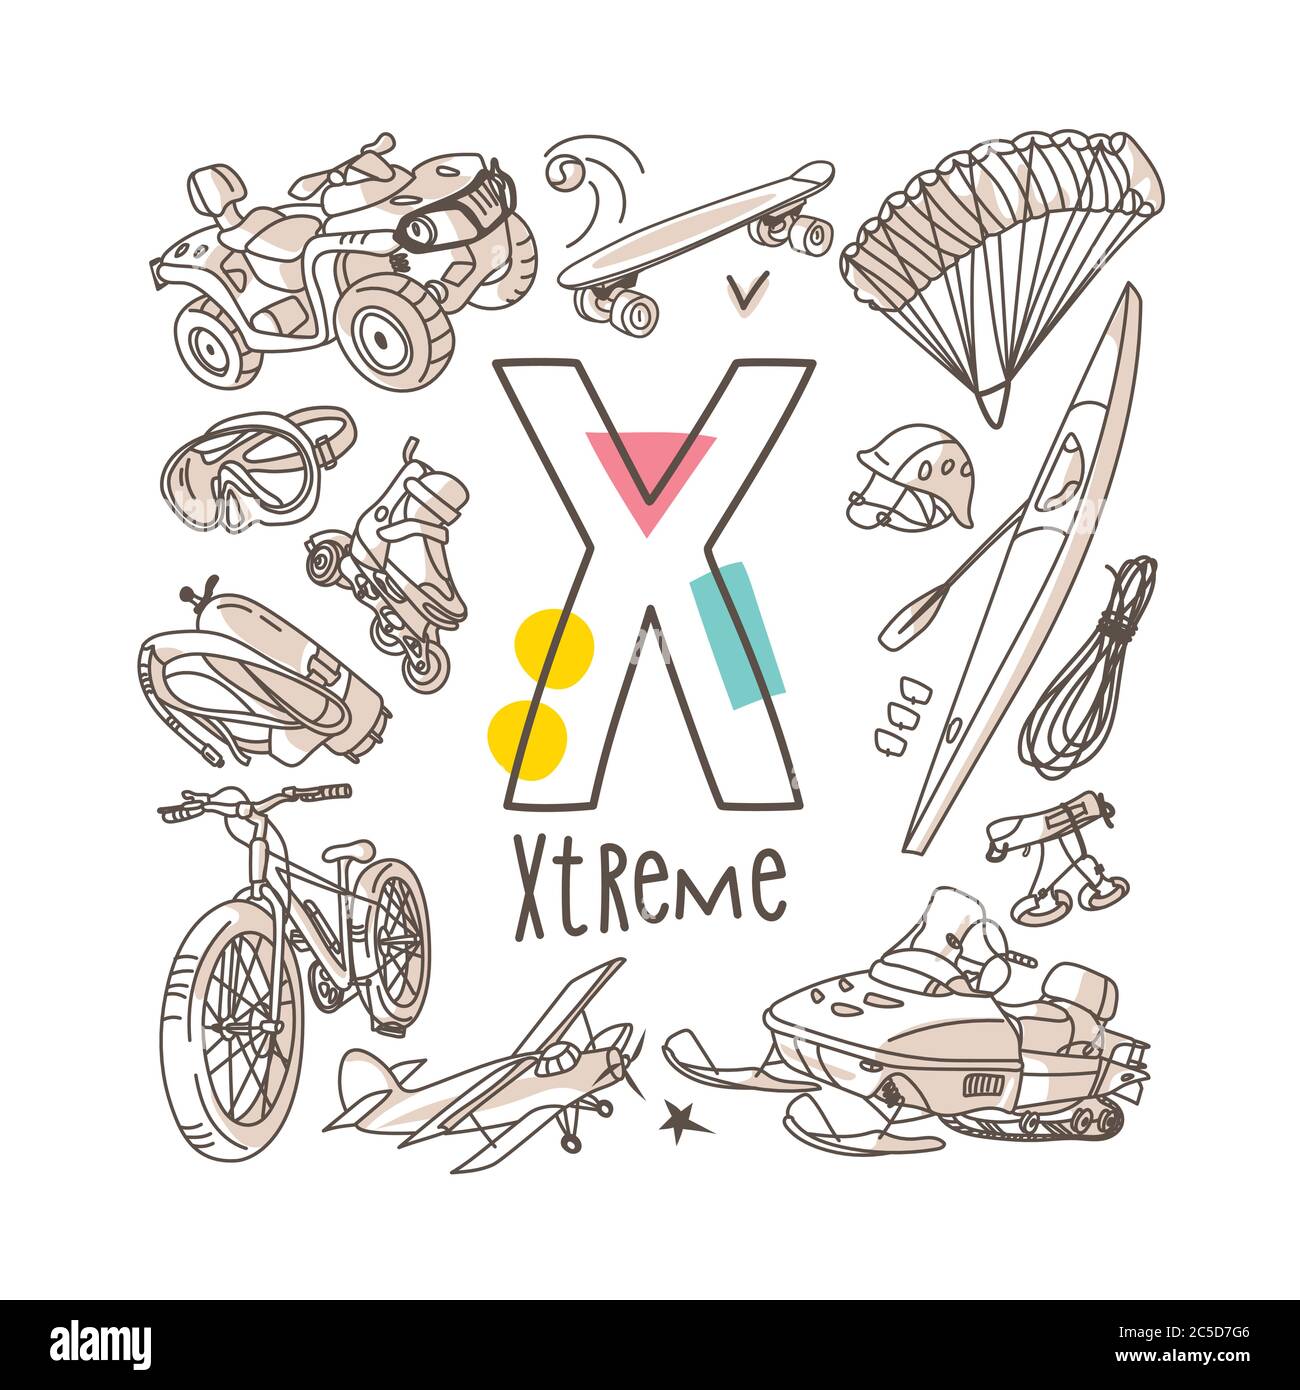 Letter X - Xtreme, cute alphabet series in doodle style, vector illustration Stock Vector